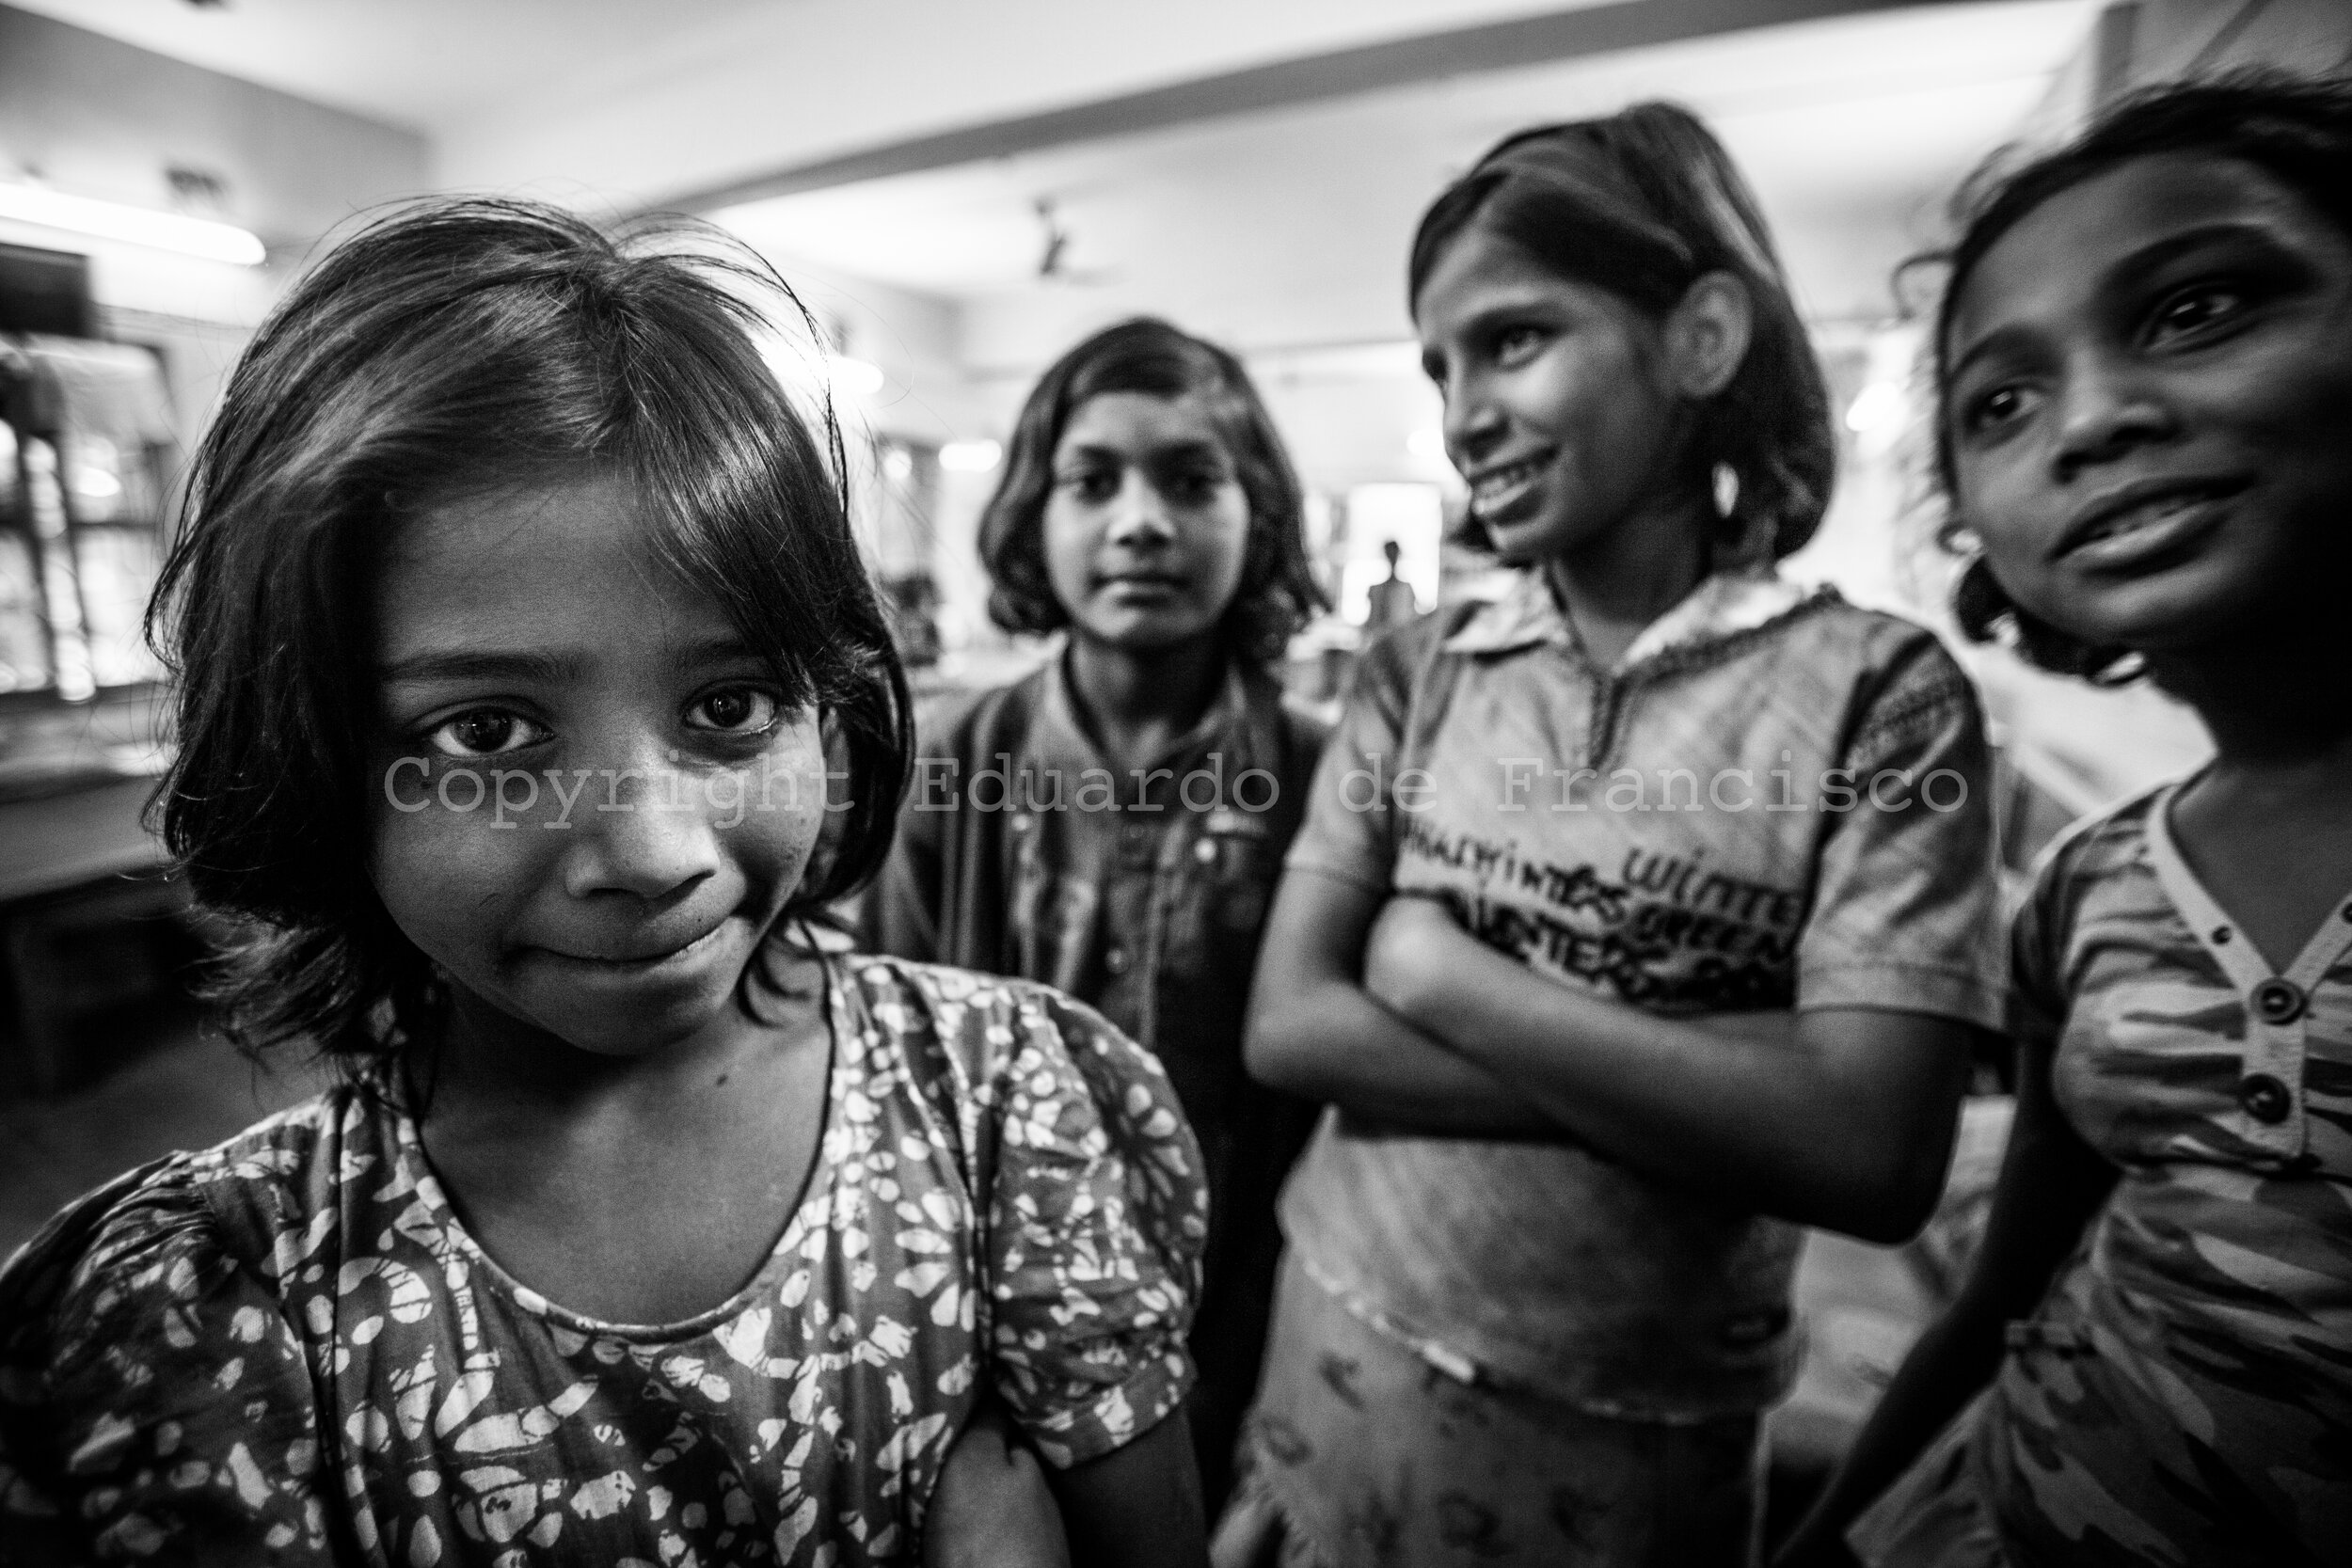  Girls at the care center of Salt Lake City. Their mothers work as prostitutes in Sonagachi and, afraid that they might be sold away, keep them here. 25.000 rupees (around 470 US dollars) is a typical price. 